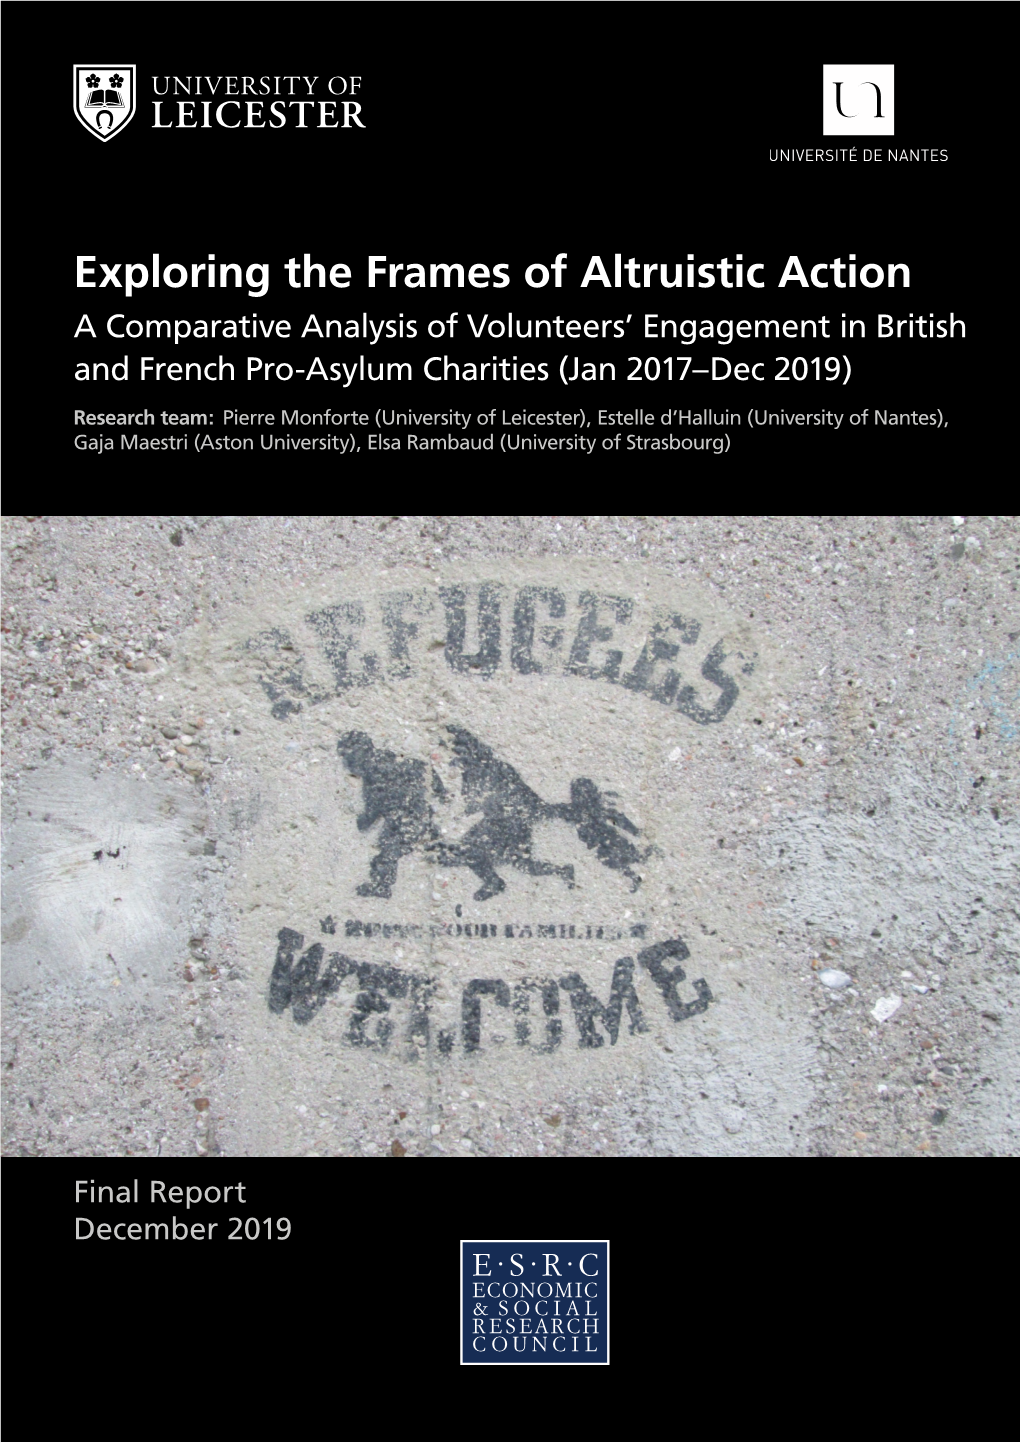 Exploring the Frames of Altruistic Action a Comparative Analysis of Volunteers’ Engagement in British and French Pro-Asylum Charities (Jan 2017–Dec 2019)